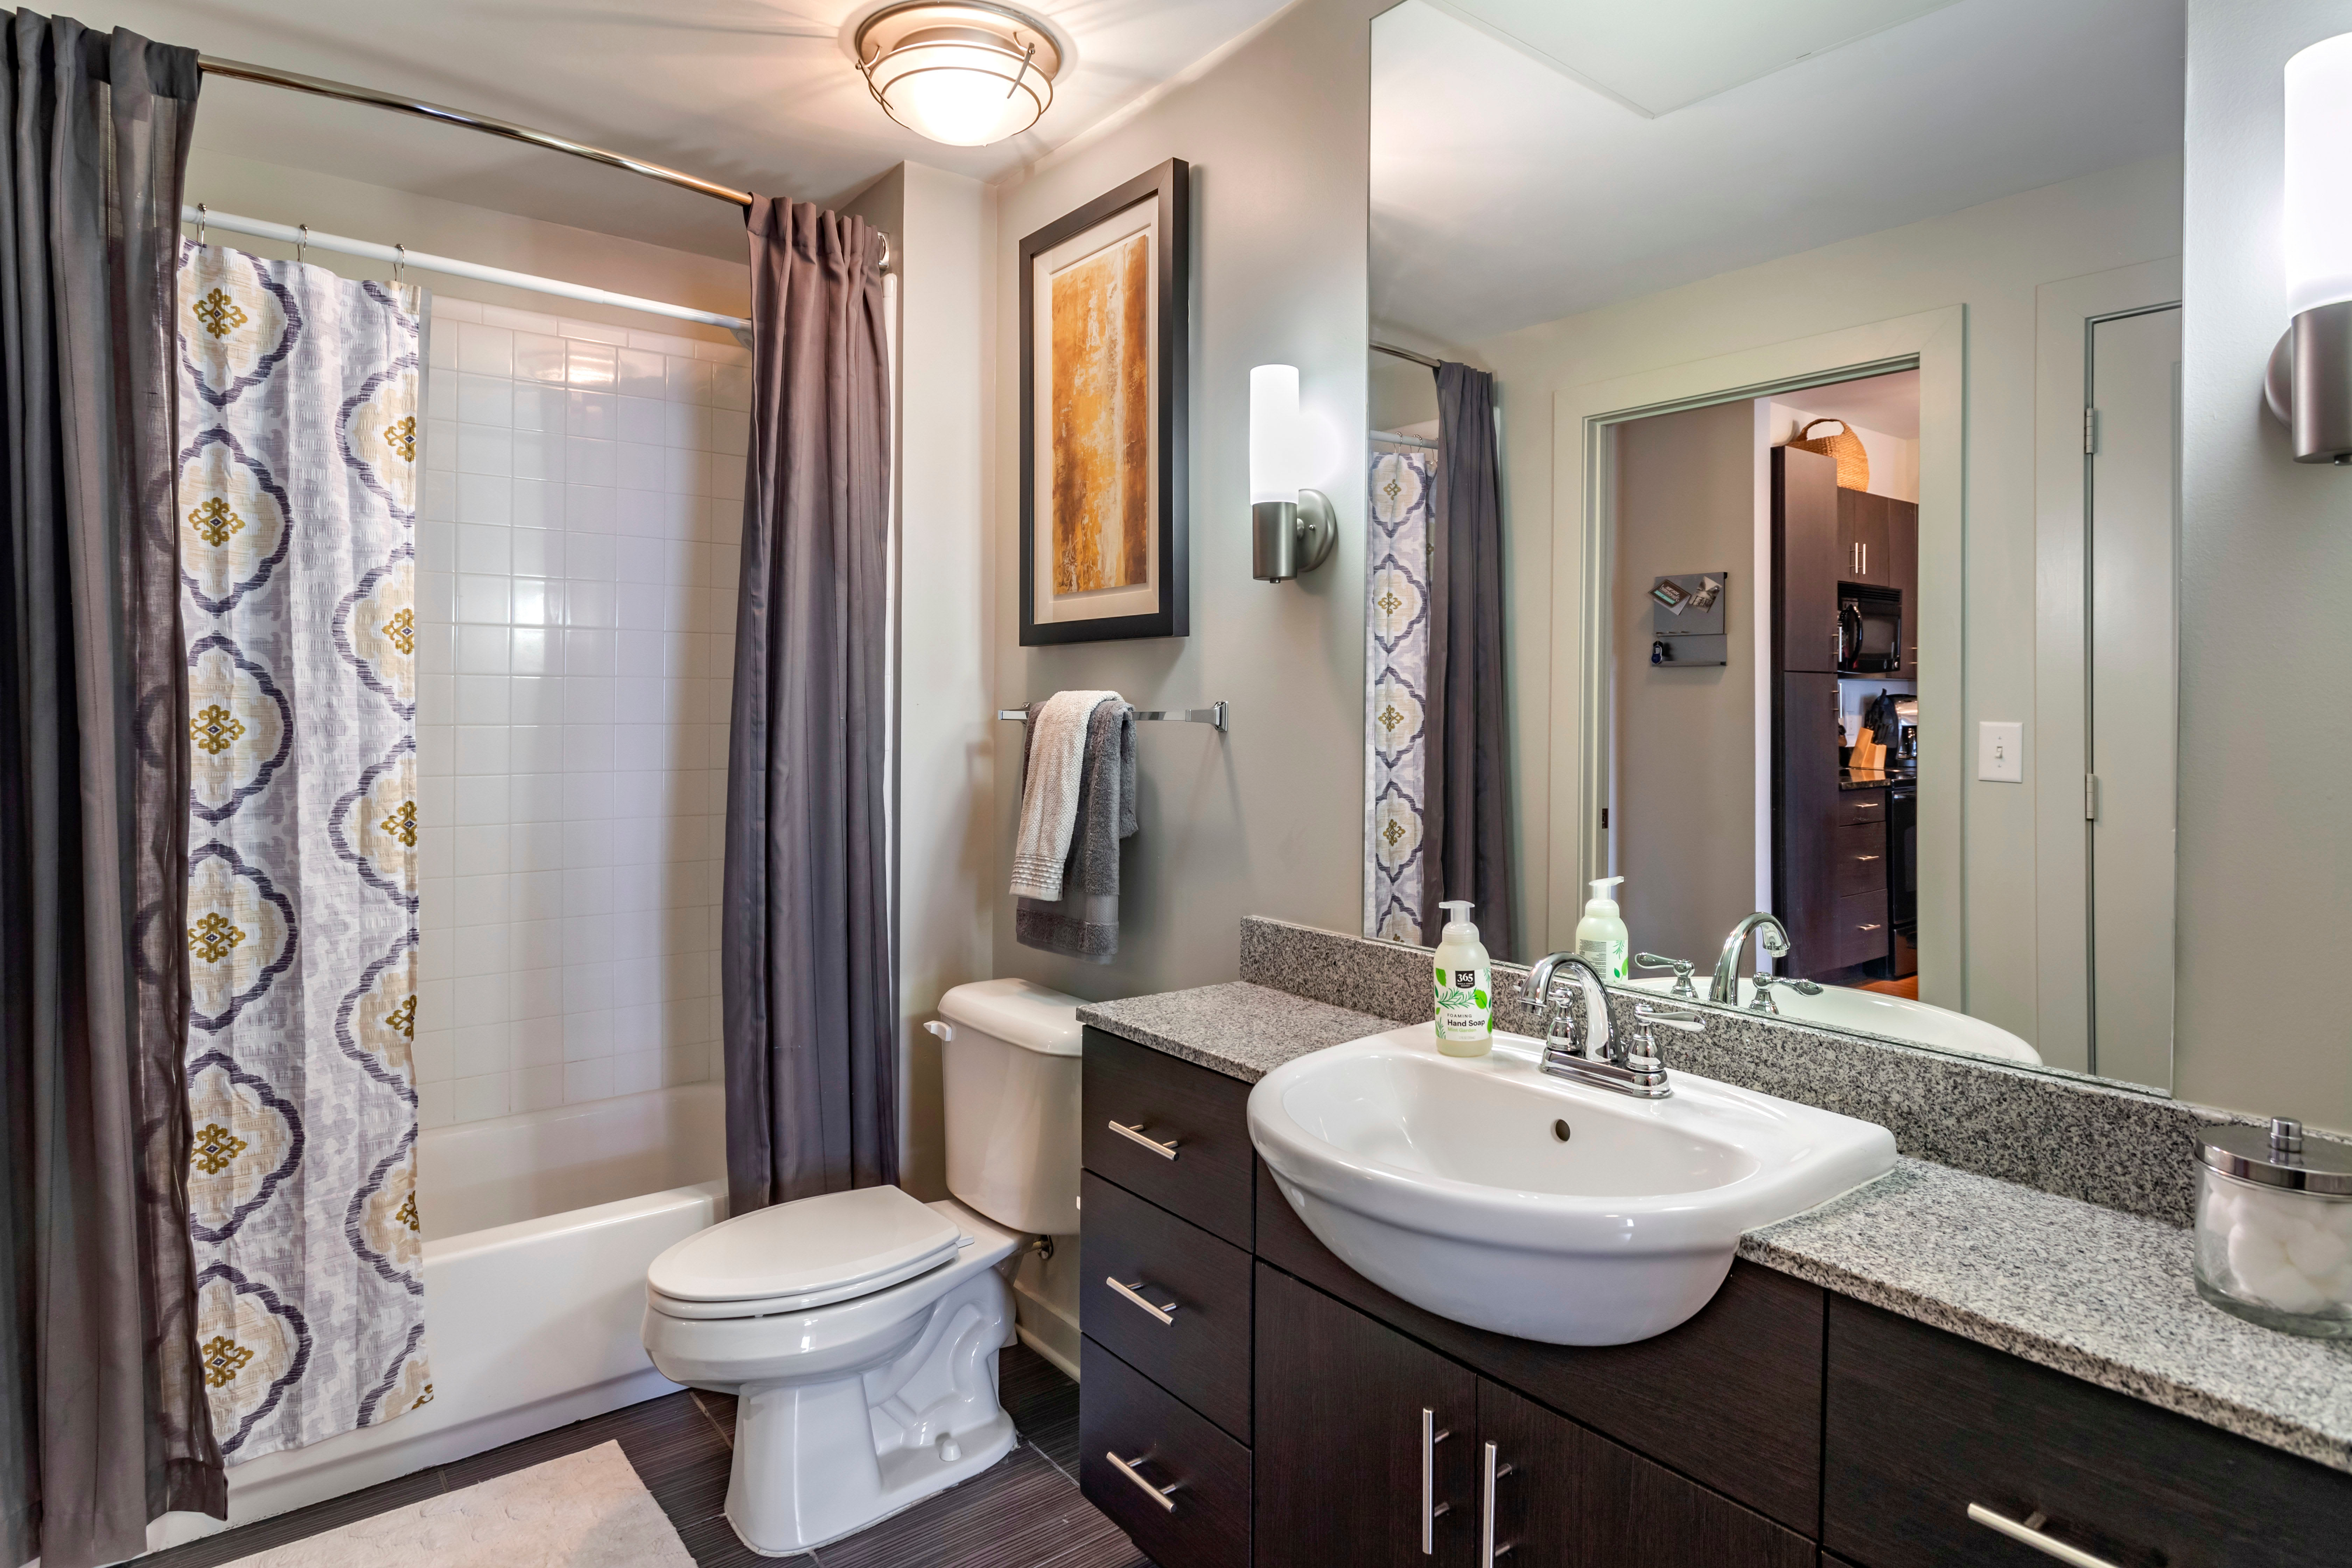 Extra storage in a model home's primary bathroom at Olympus Midtown in Nashville, Tennessee